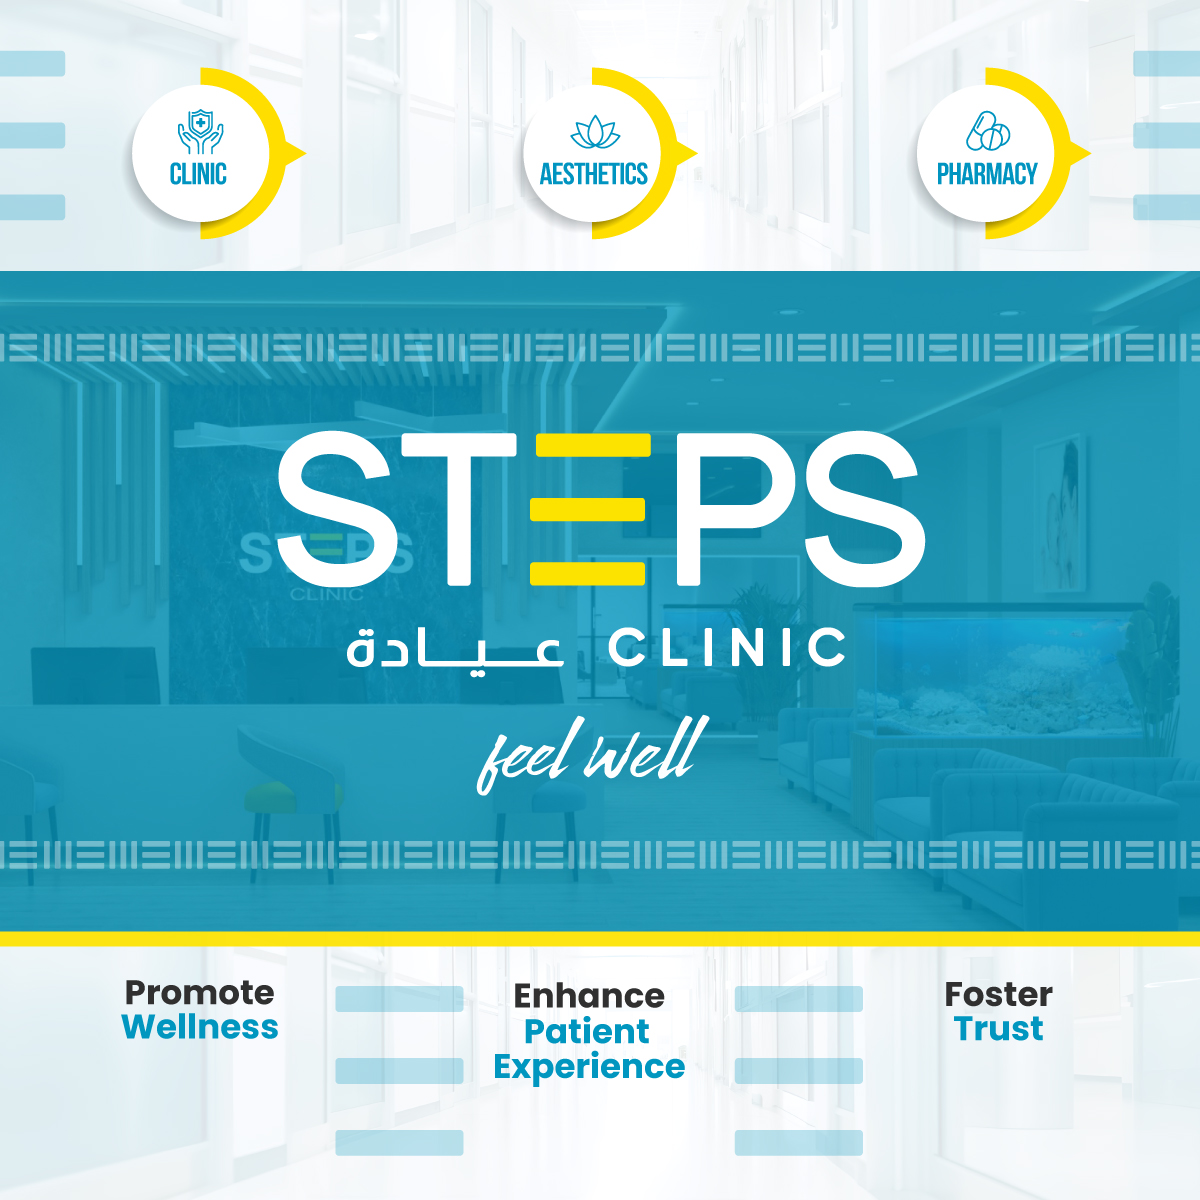 Welcome to STEPS Clinic 🏥 - Your Destination for Beauty and Healthcare Excellence! Follow us for expert beauty tips, healthcare updates, and your path to feeling and looking your best. 💆‍♀💉 
#StepsClinic #beautyandhealthcare #dubaiclinicstories #dubaiclinics #dubaiclinic